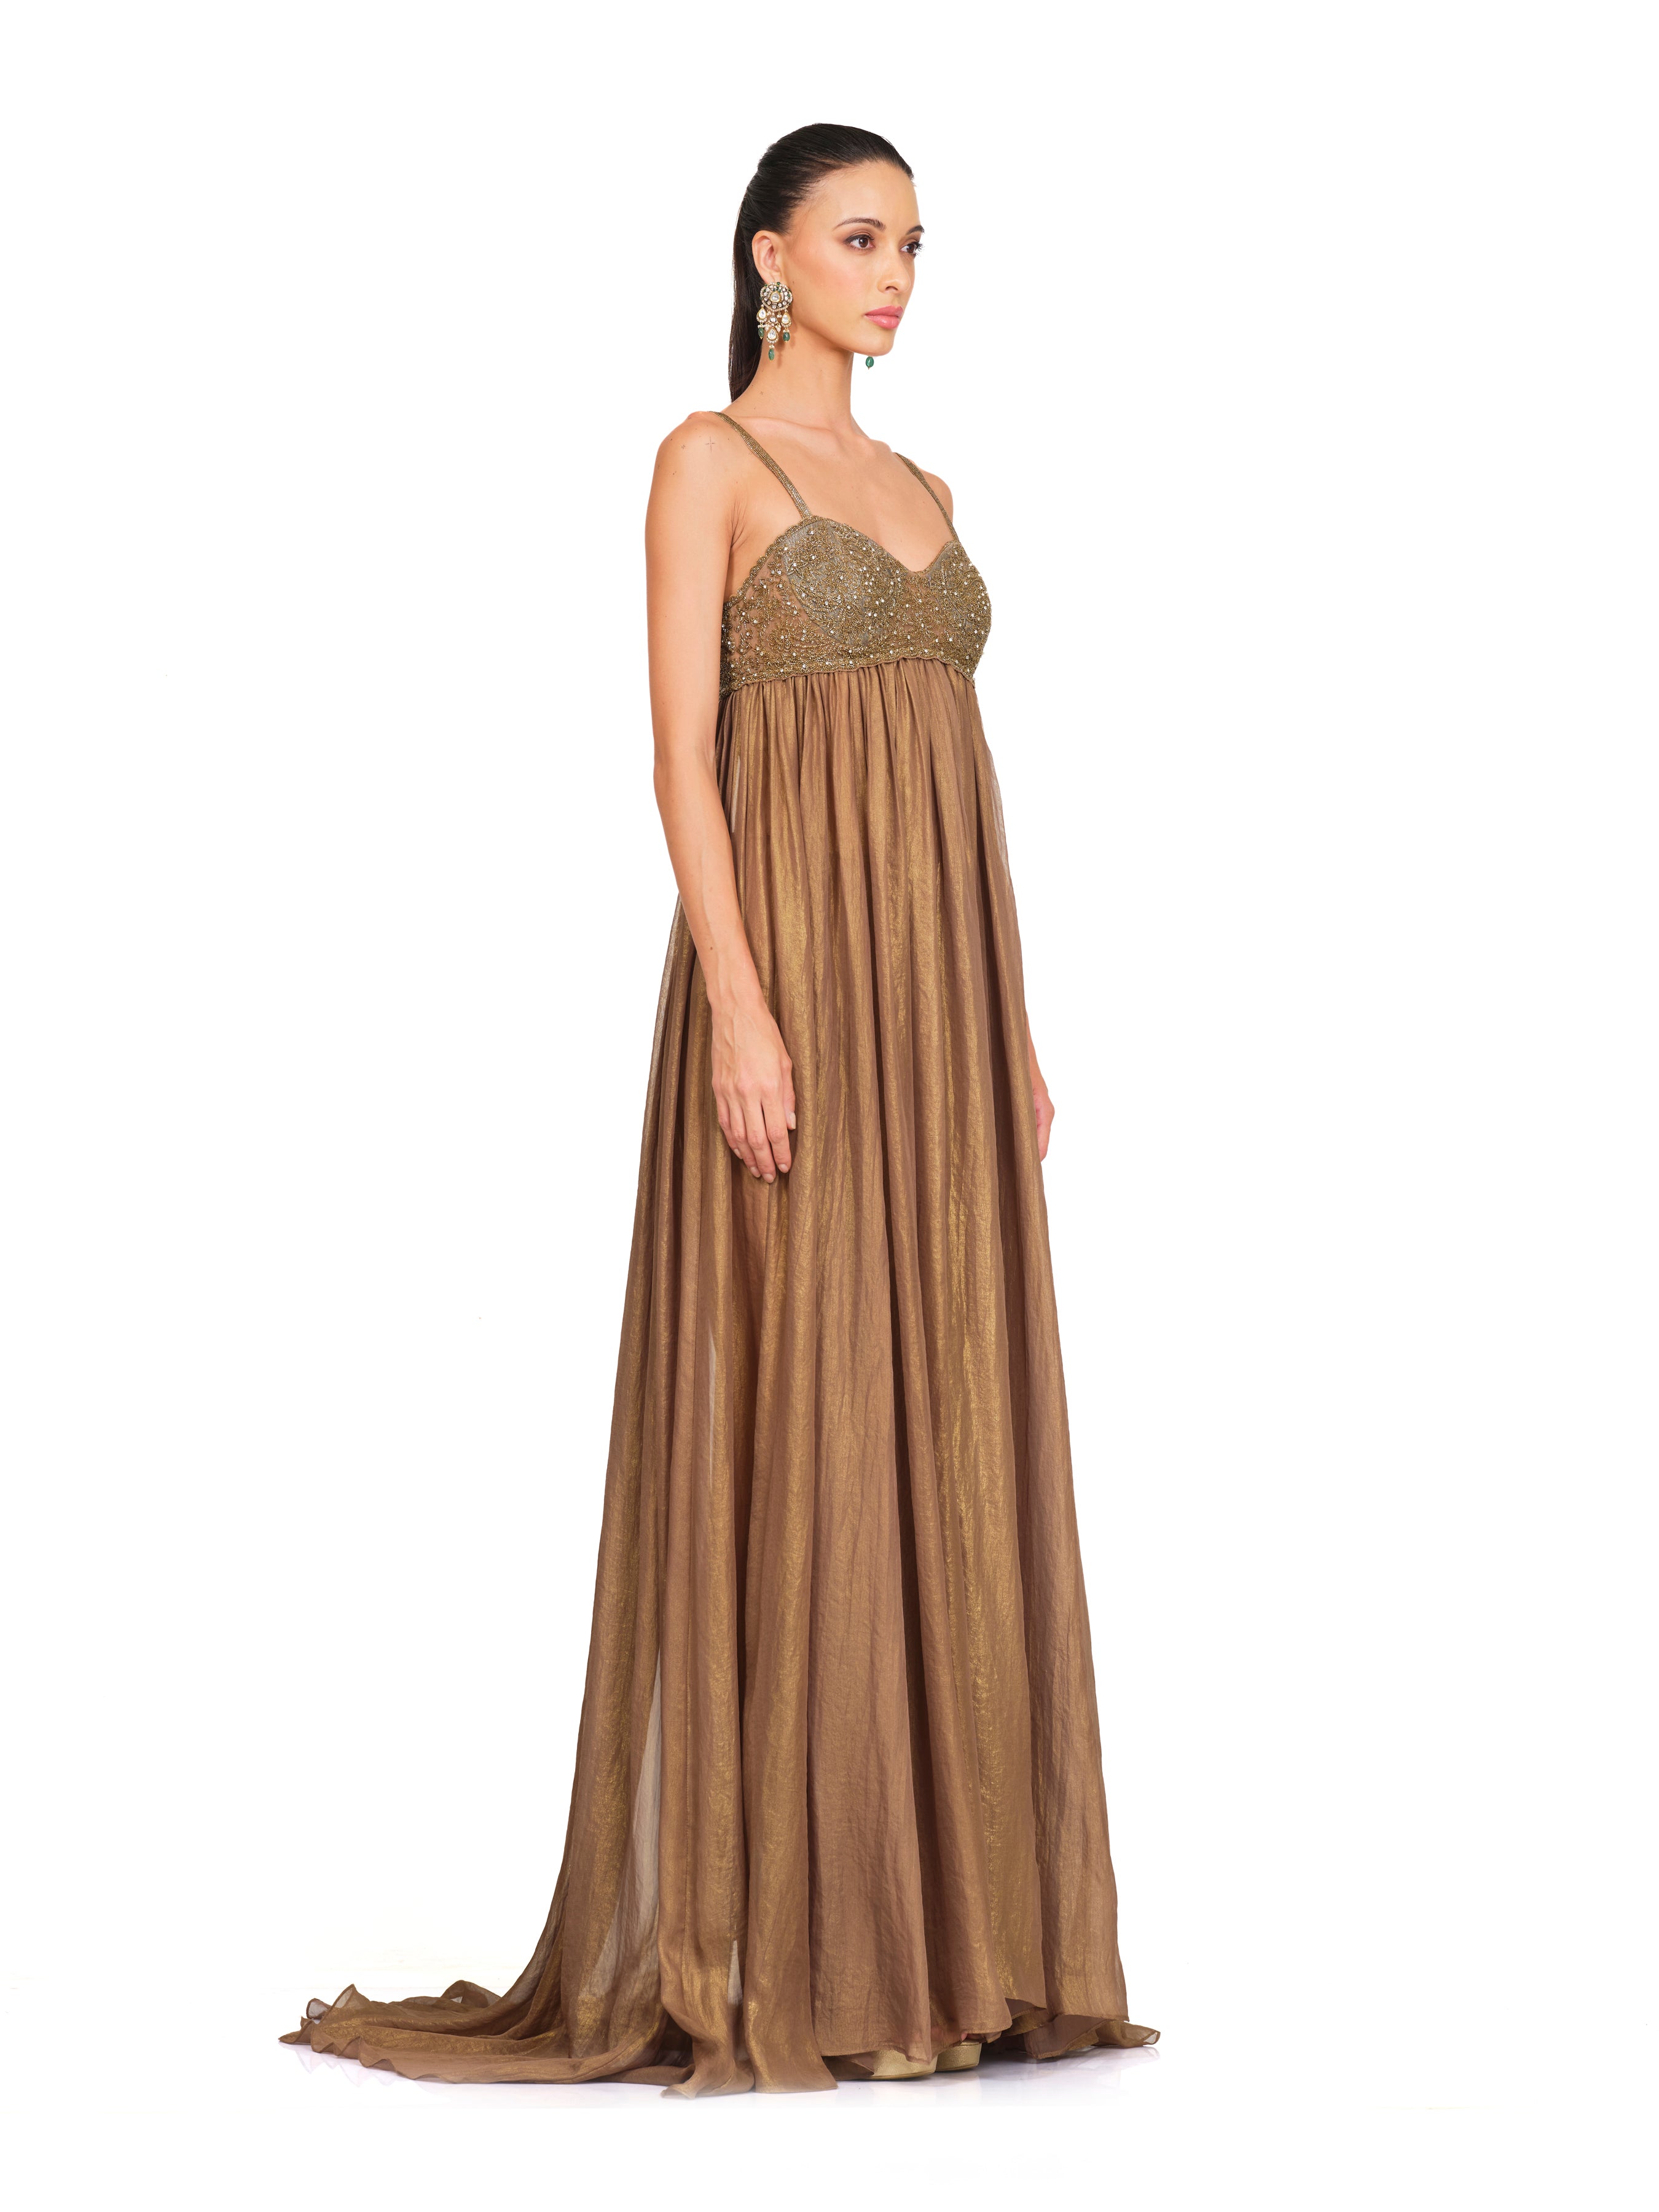 Embroidered Bust Metallic Gown